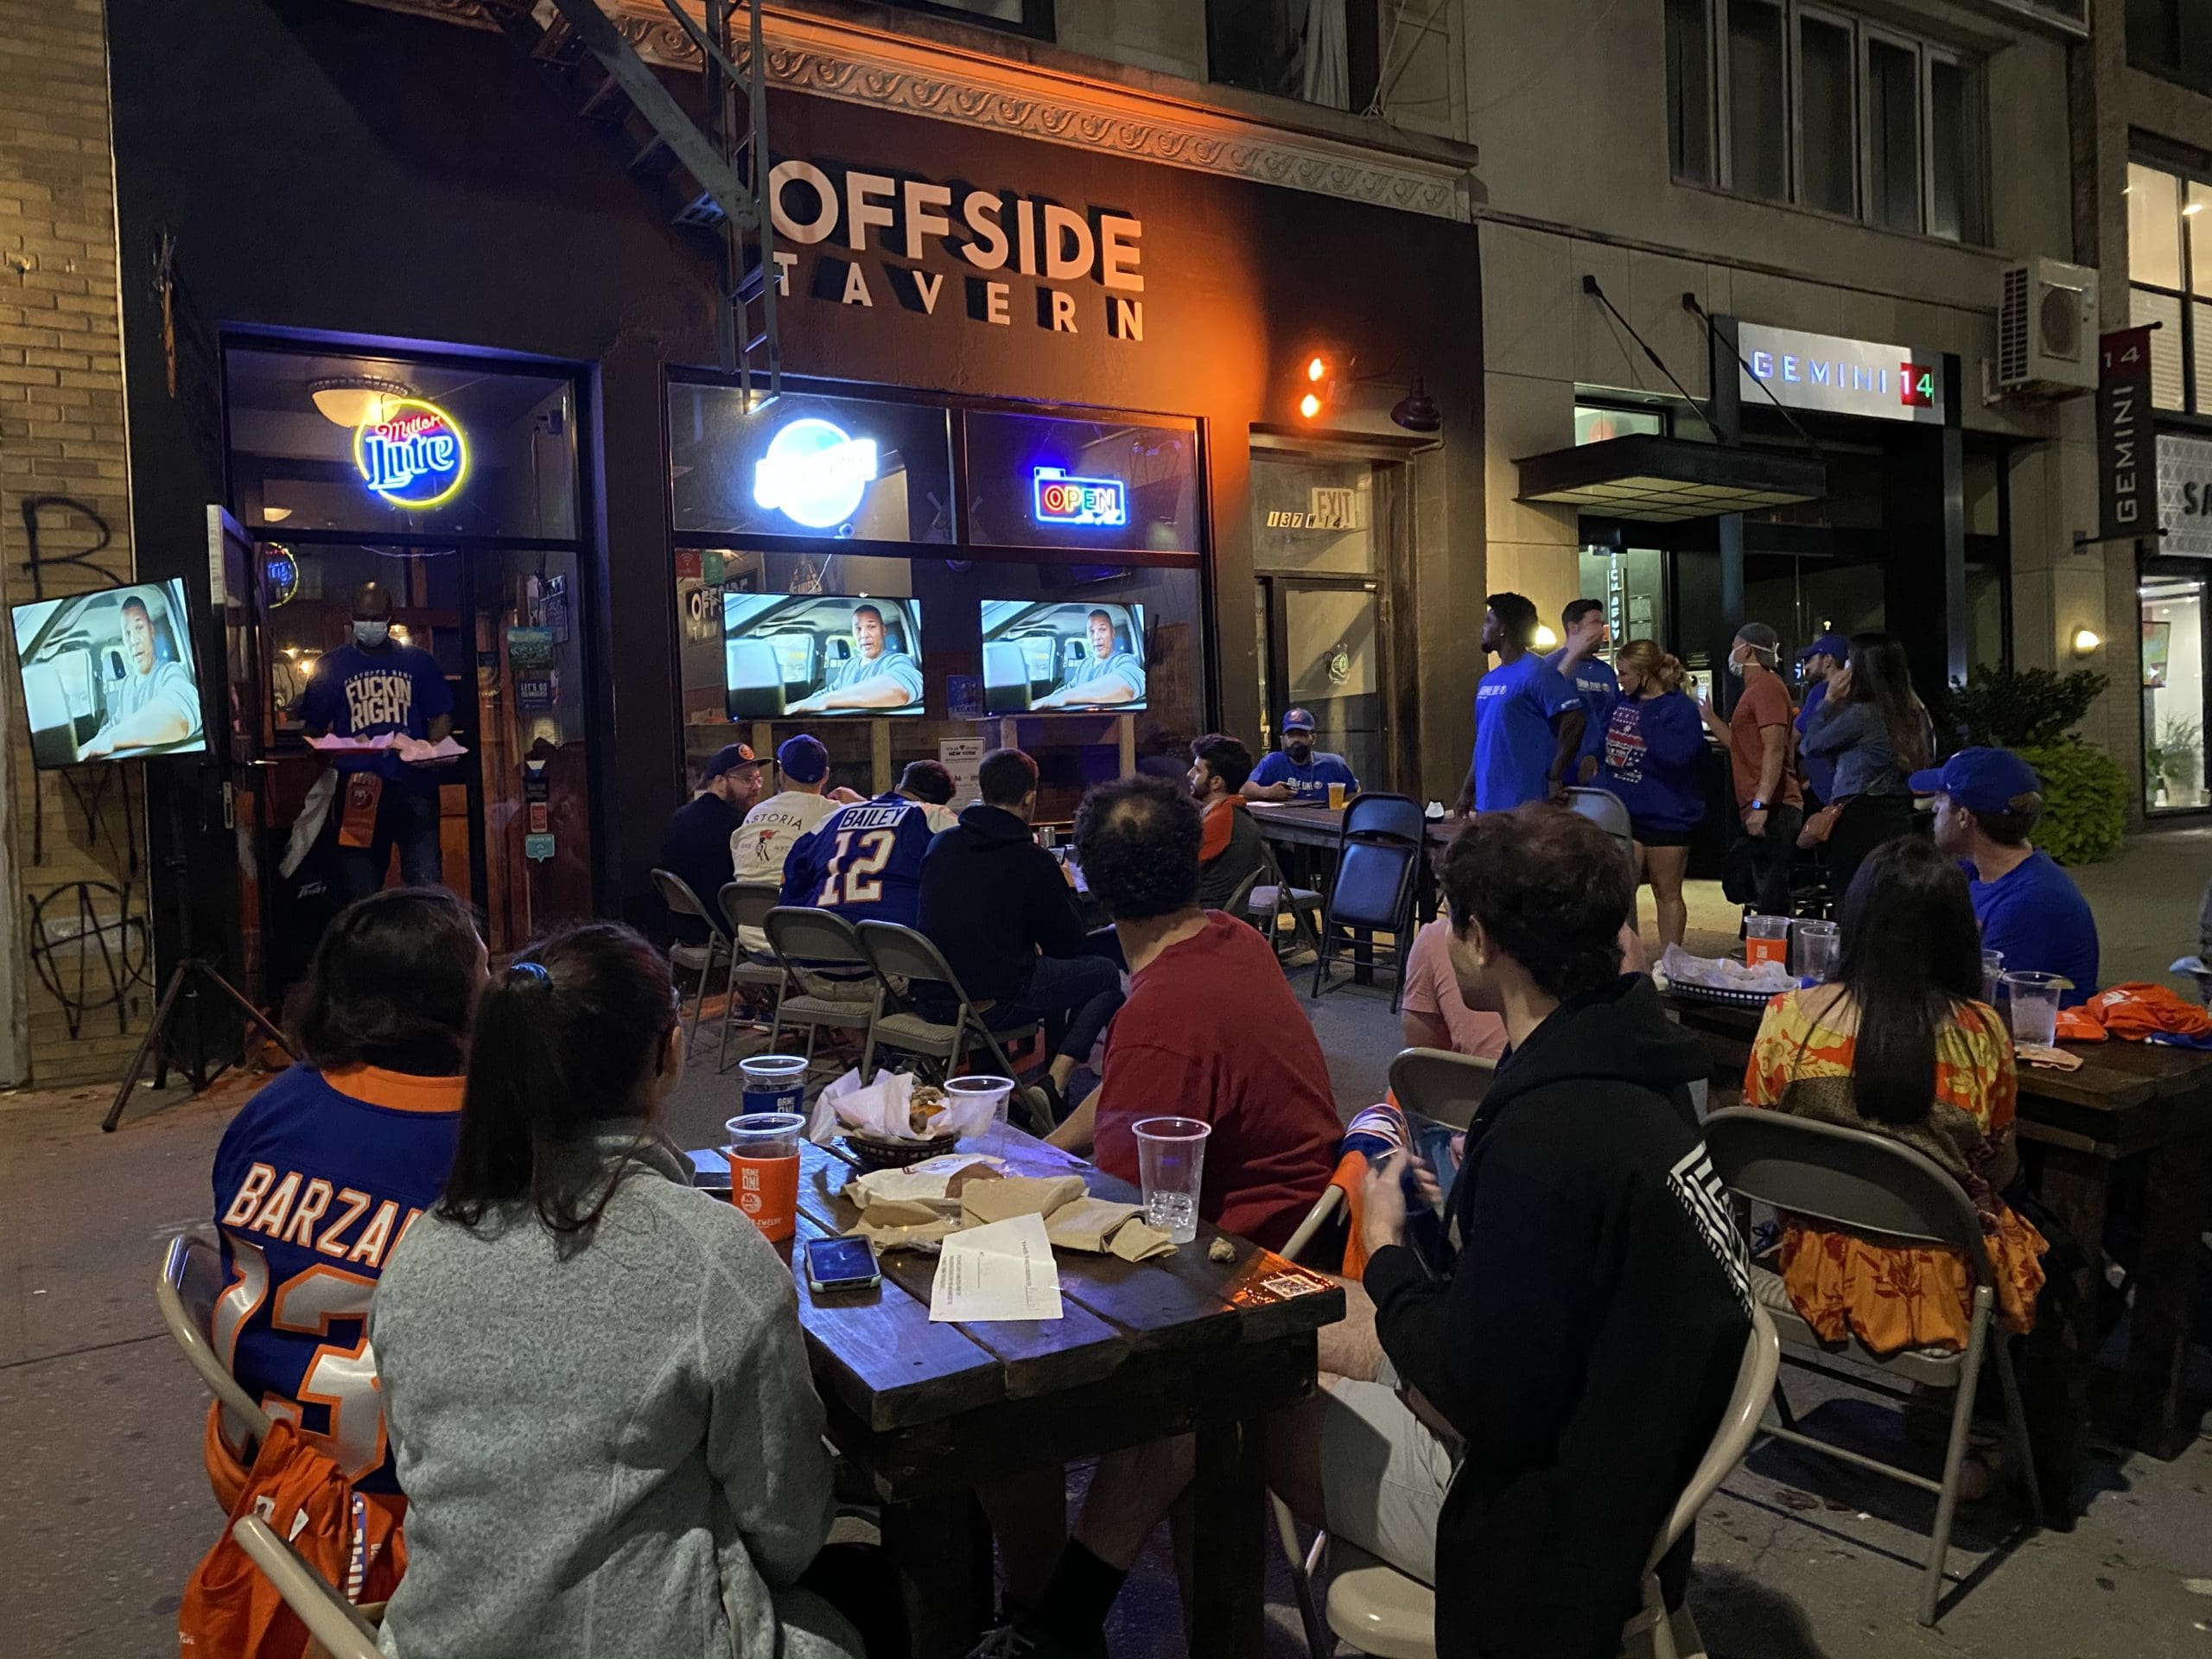 New York Islanders fans watch Game 3 at Offside Tavern in New York City